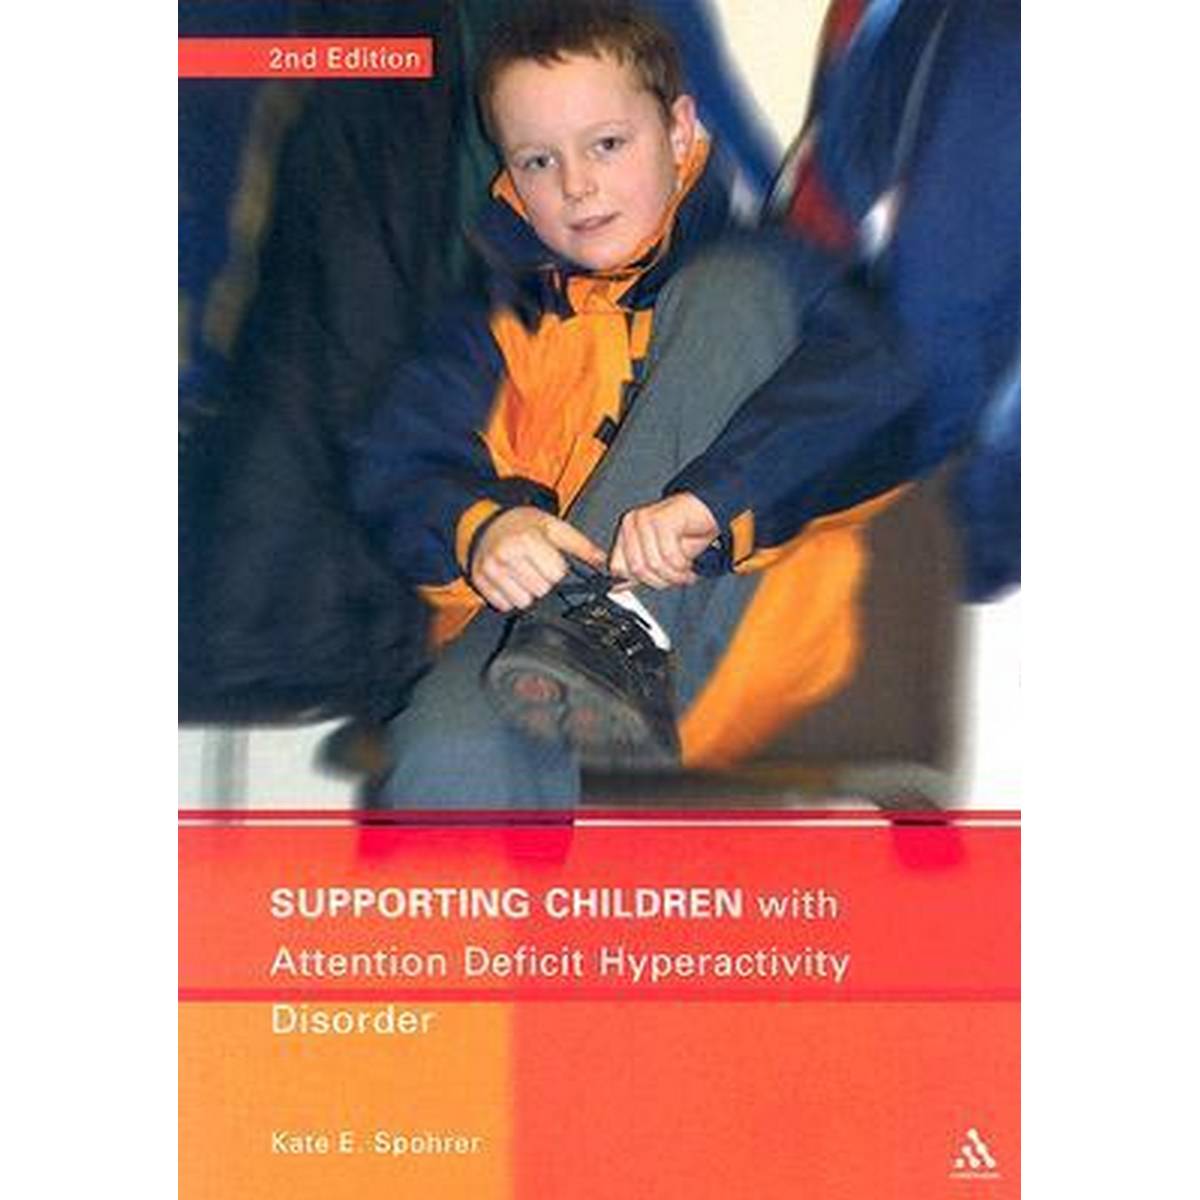 Supporting Children with ADHD (Spohrer)